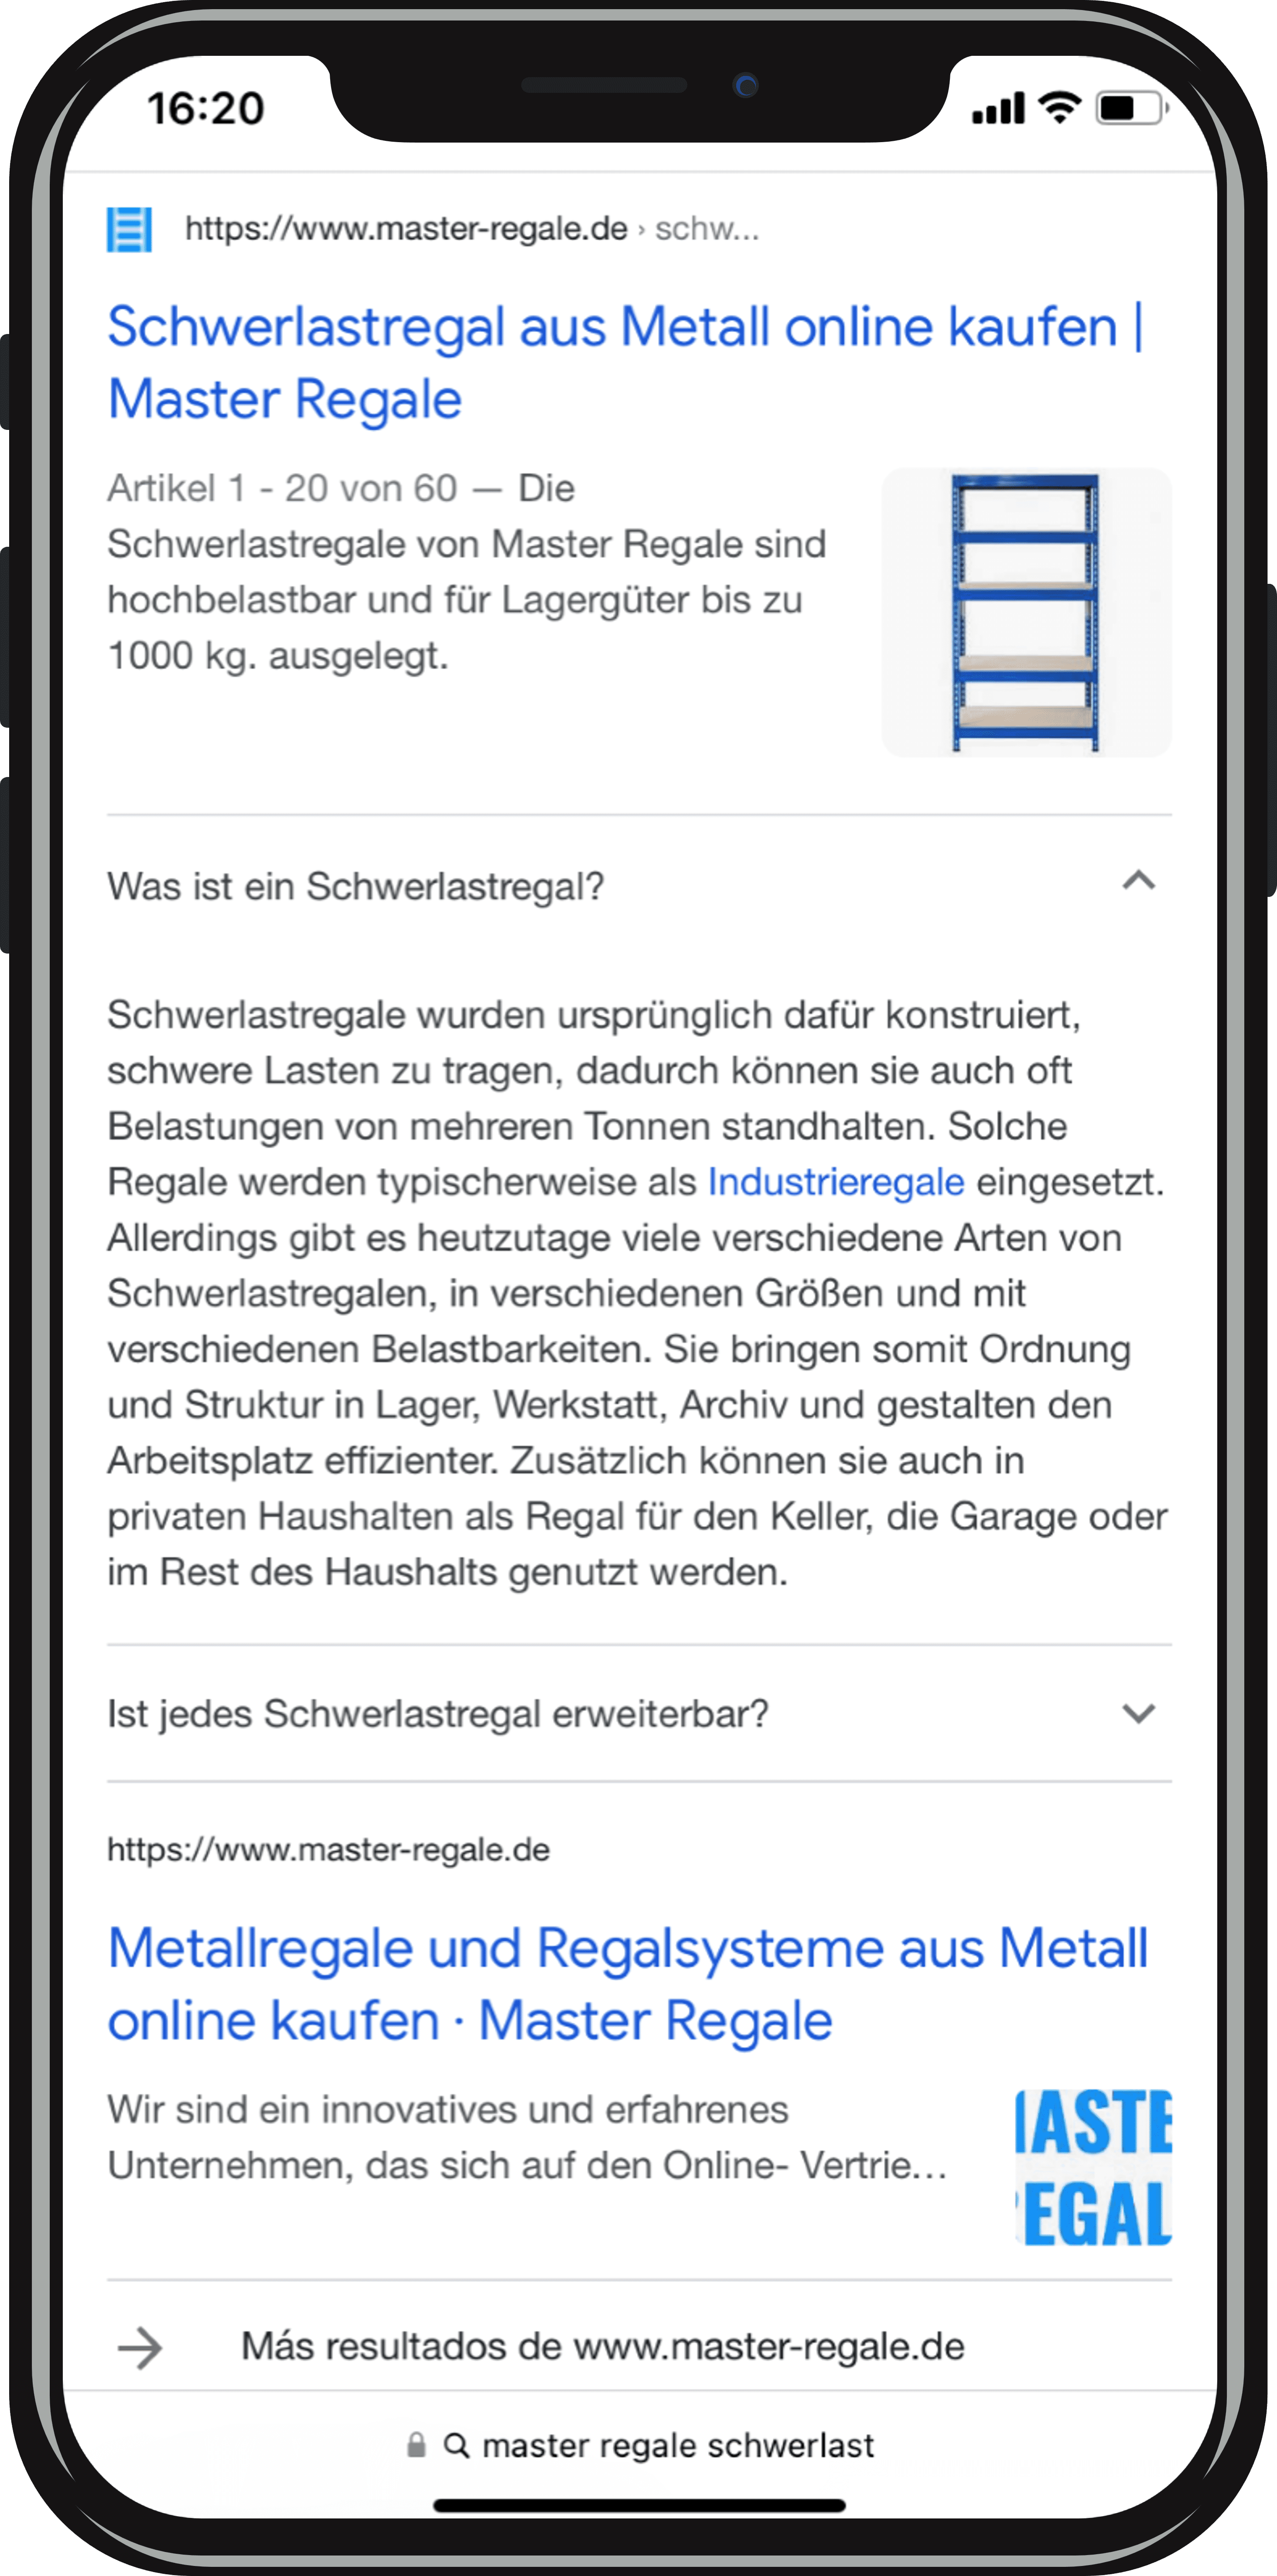 Presentation of the FAQ snippet feature using a screenshot from the search engine.